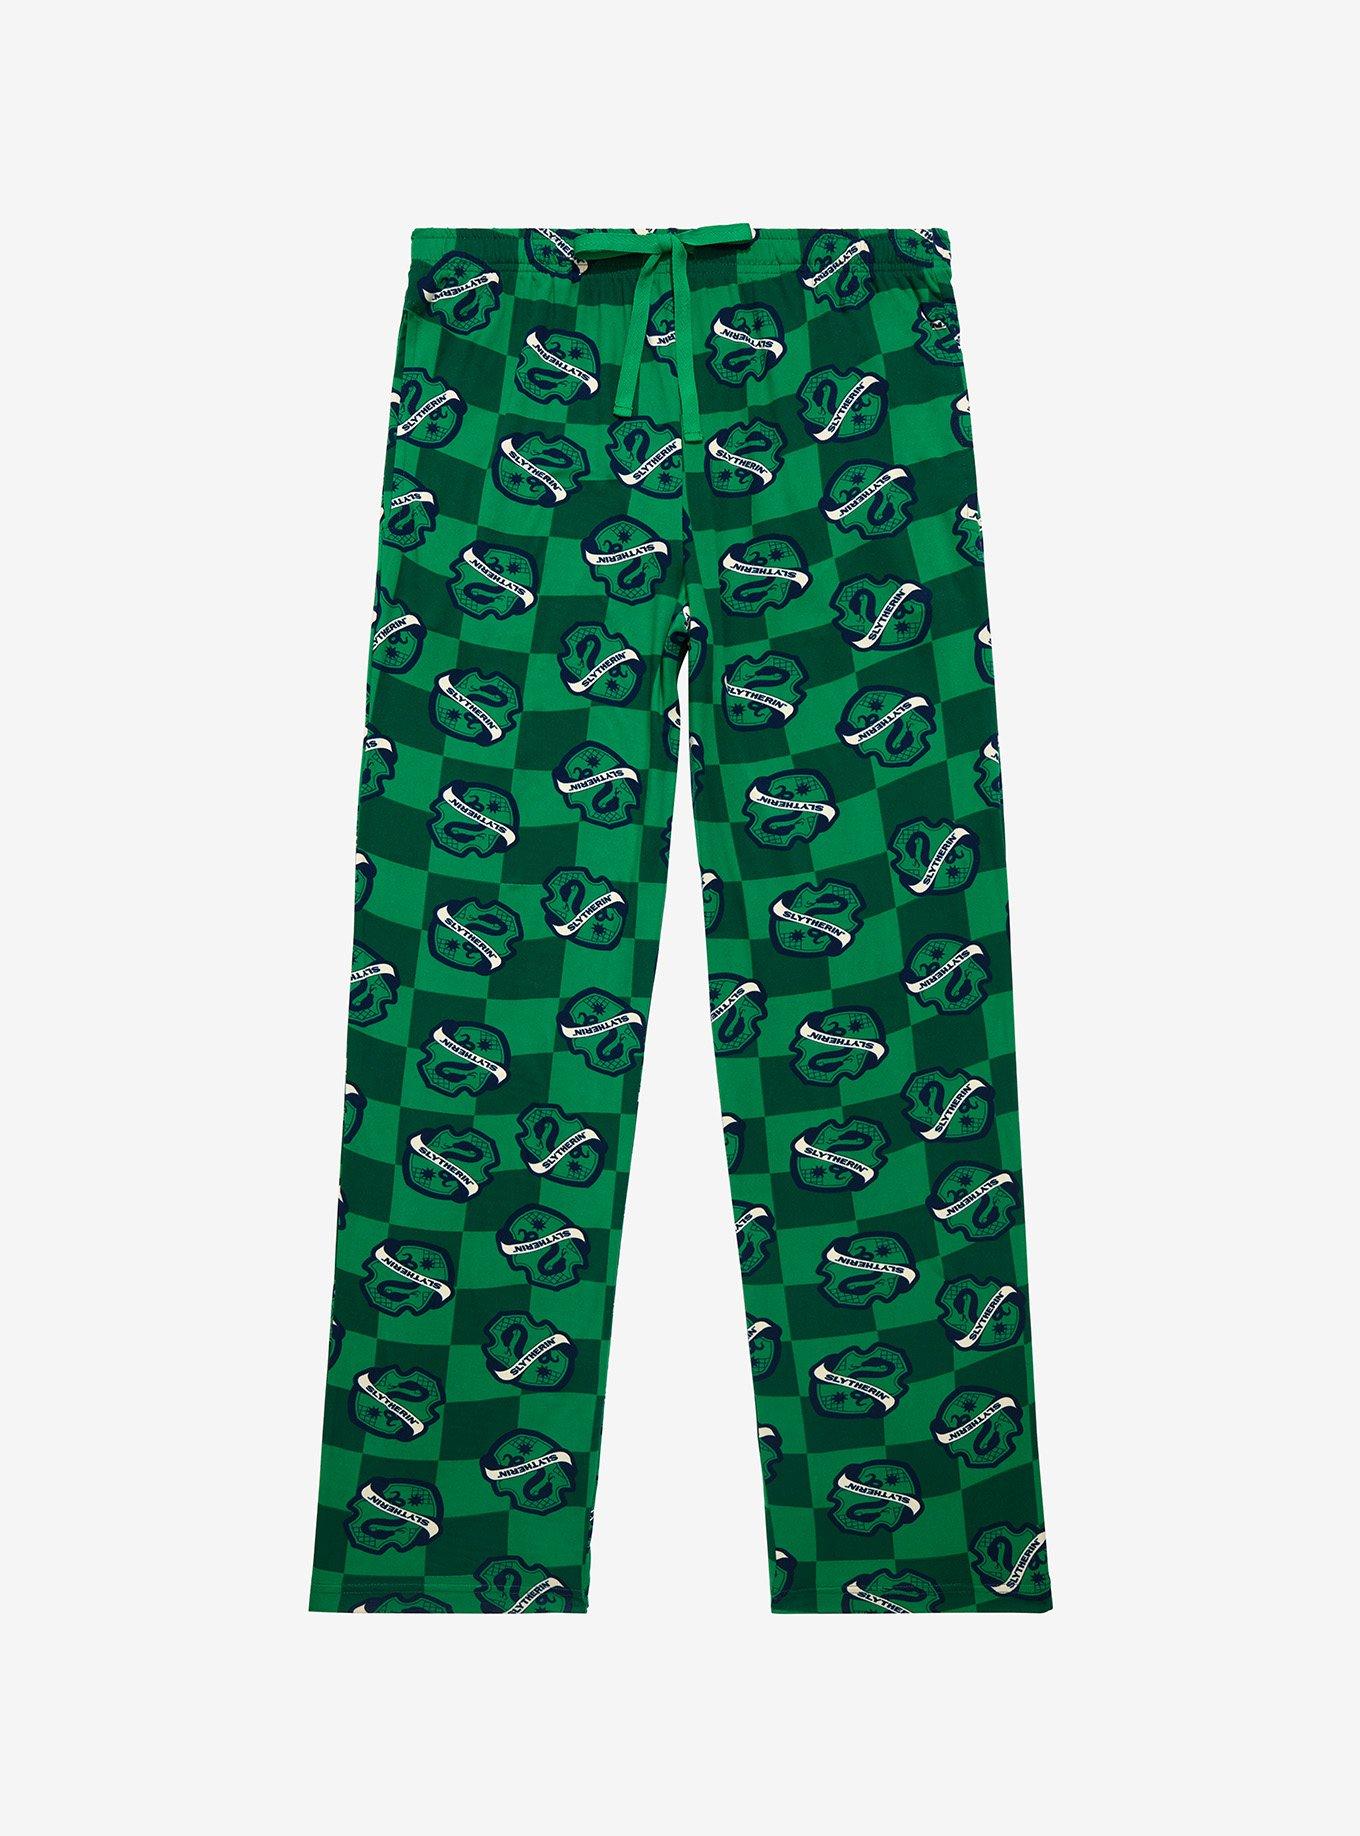 Harry Potter Slytherin House Crest Checkered Sleep Pants - BoxLunch Exclusive , MULTI, hi-res